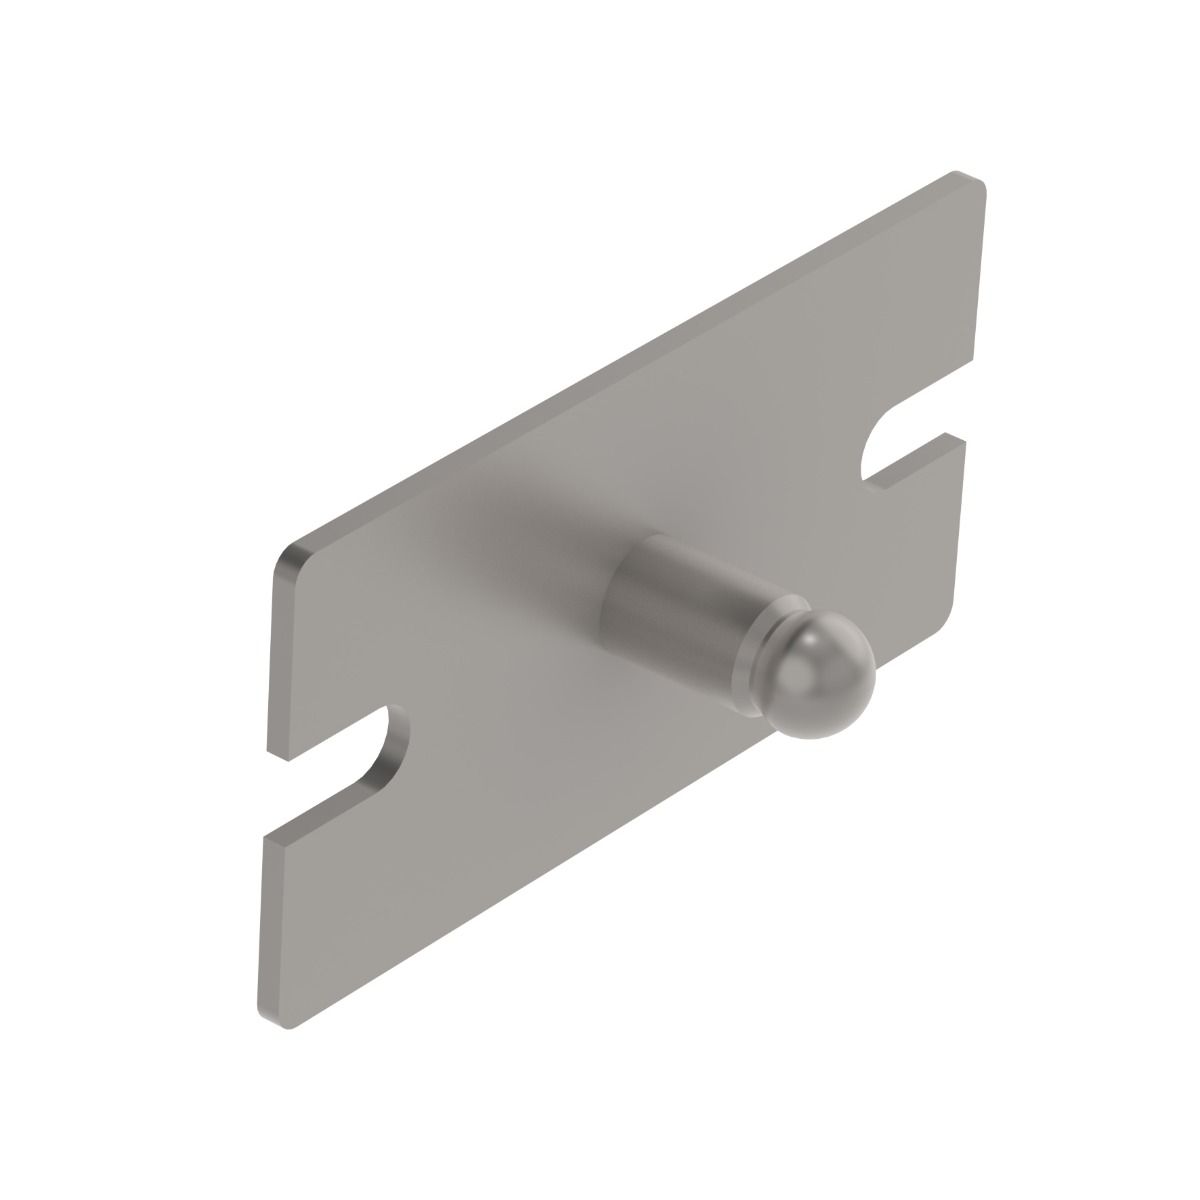 Surface mount metal male MC-SM5 screw fix clip suitable for MC-F5 and MC-F10